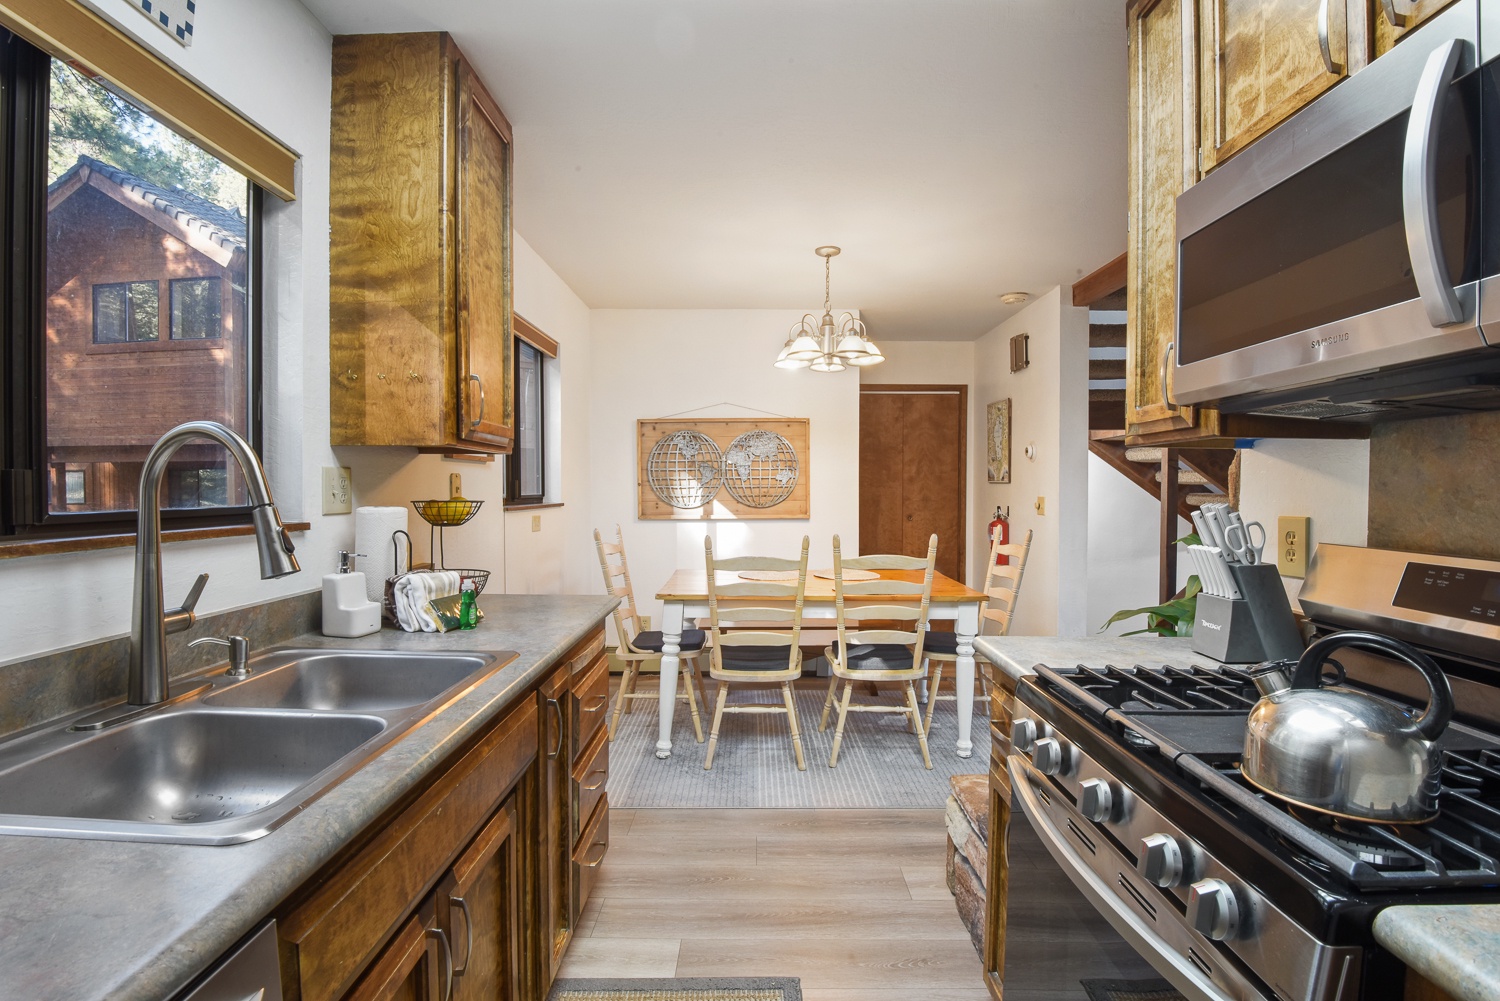 The cozy kitchen is well-equipped and will have you feeling right at home